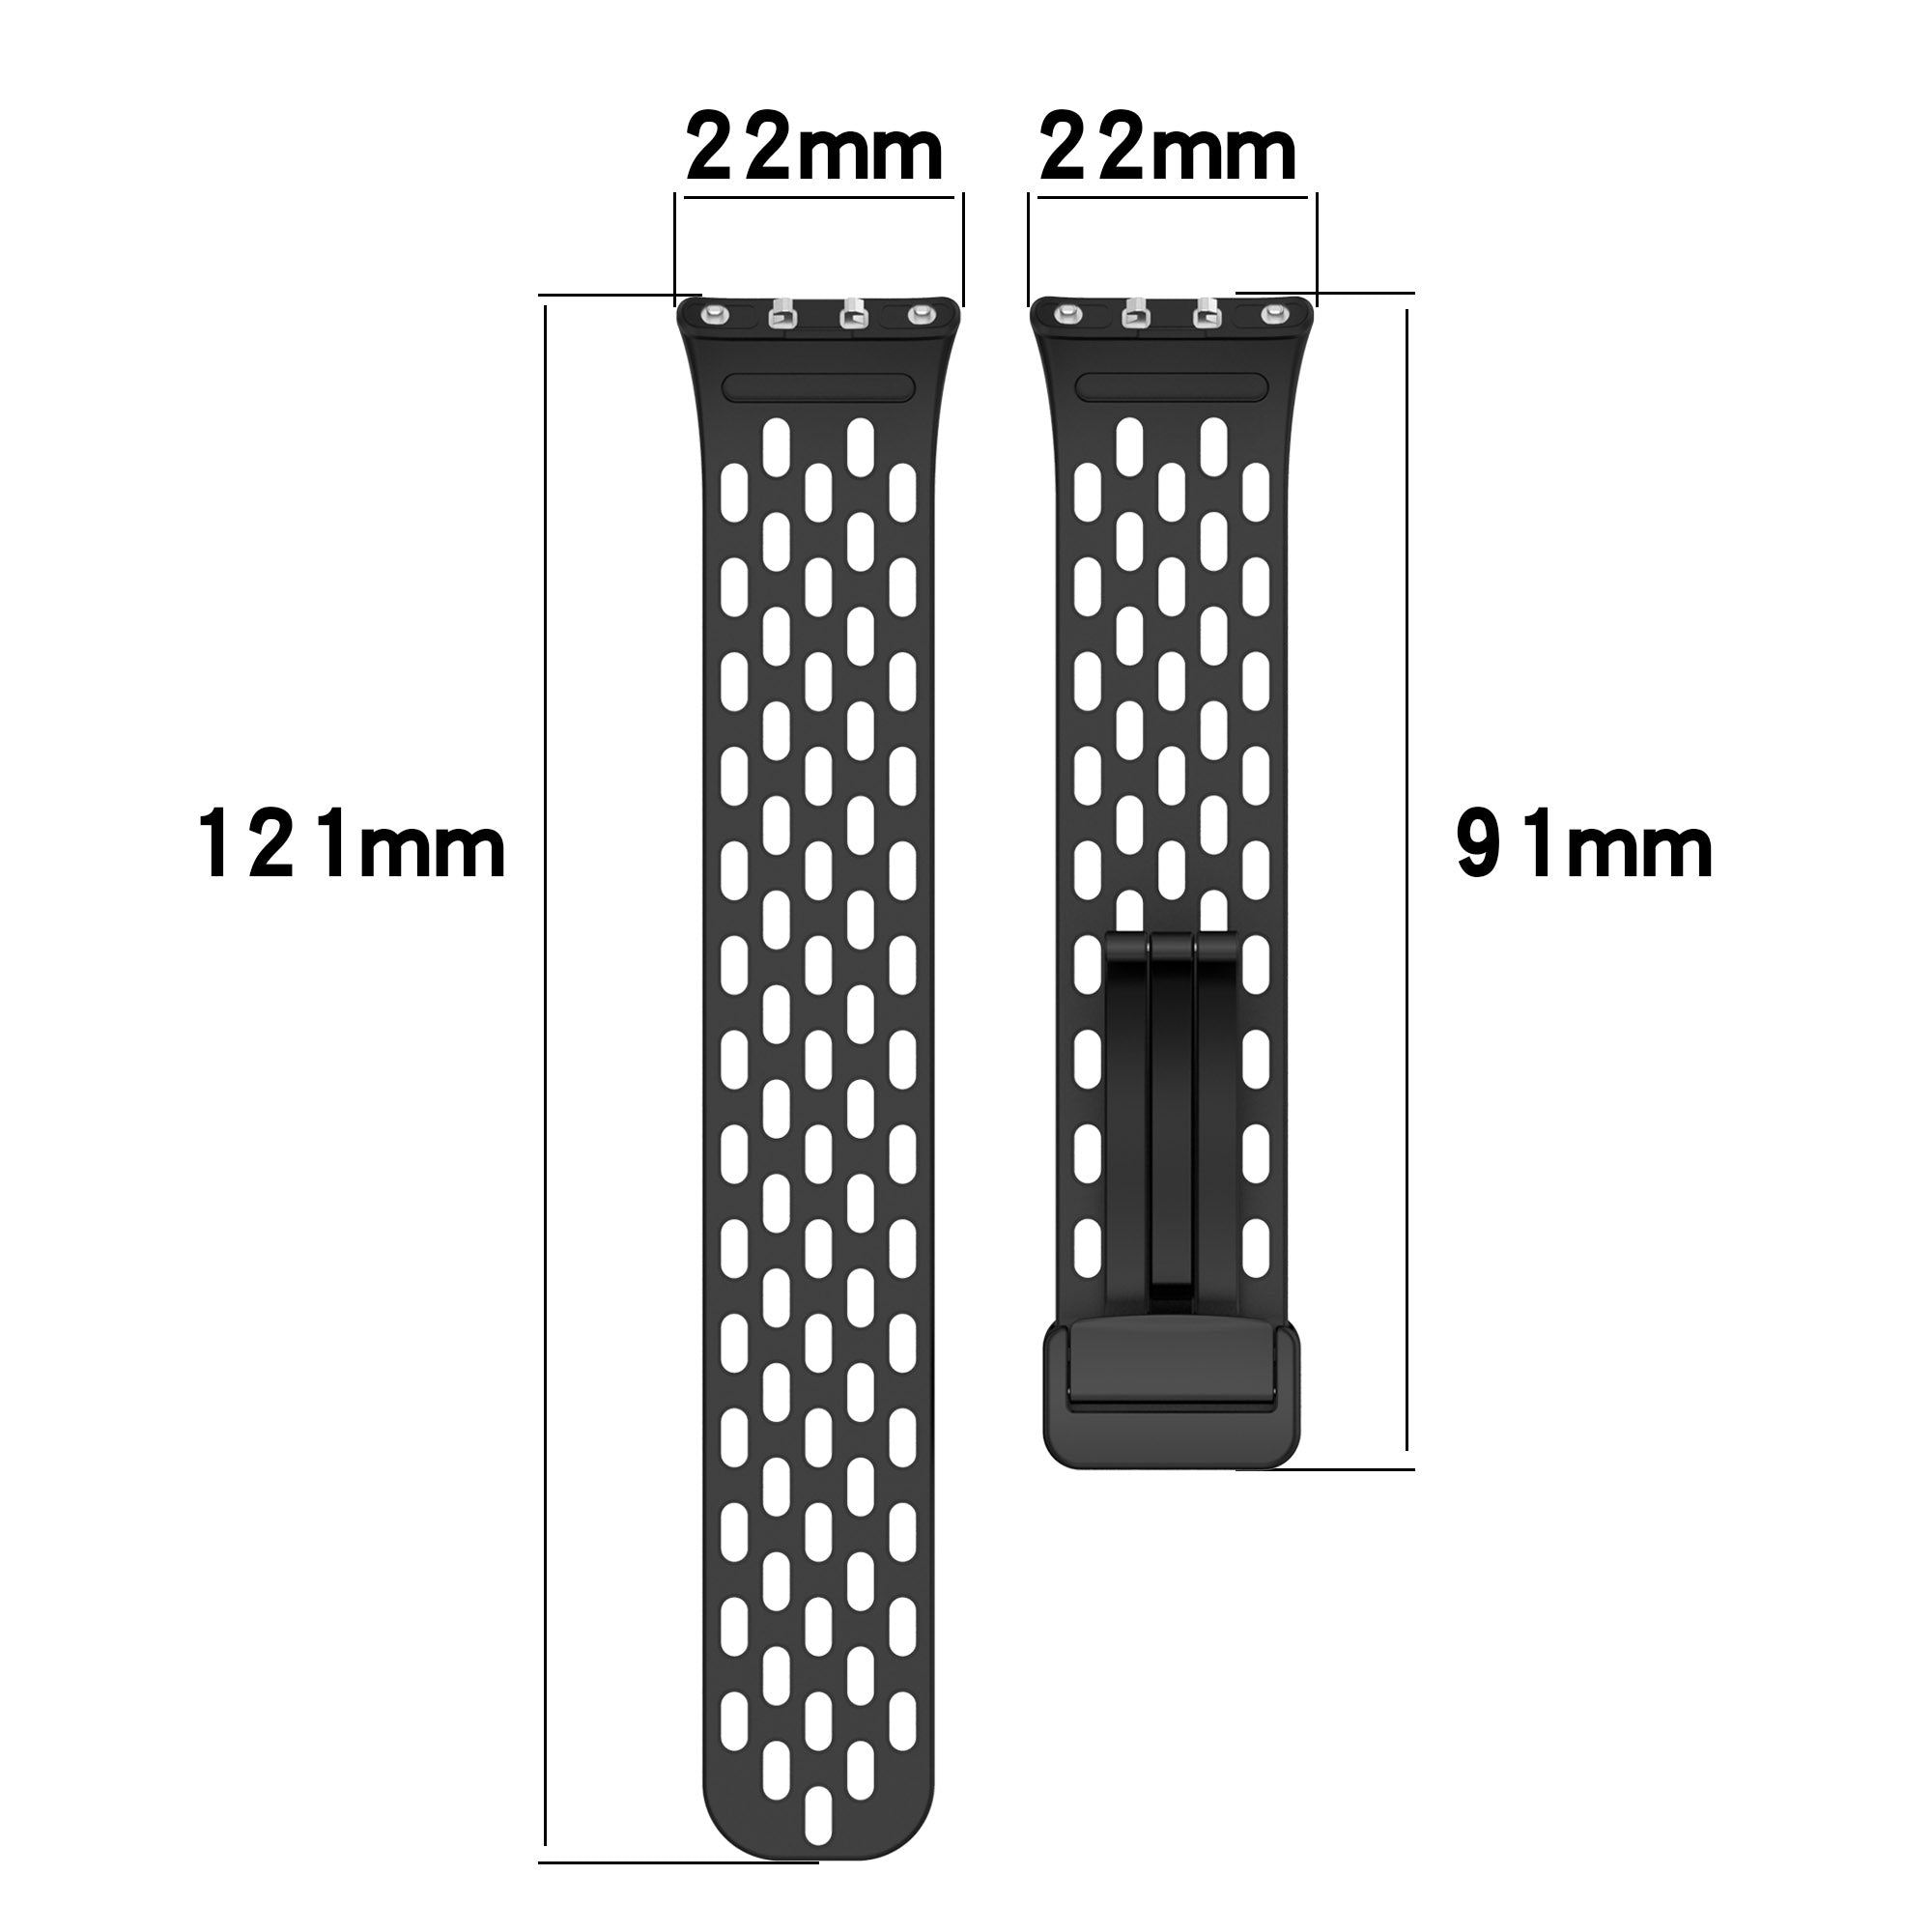 Wrist Band for Samsung Galaxy Fit3 R930 Magnetic Silicone Smartwatch Bracelet Strap - Black